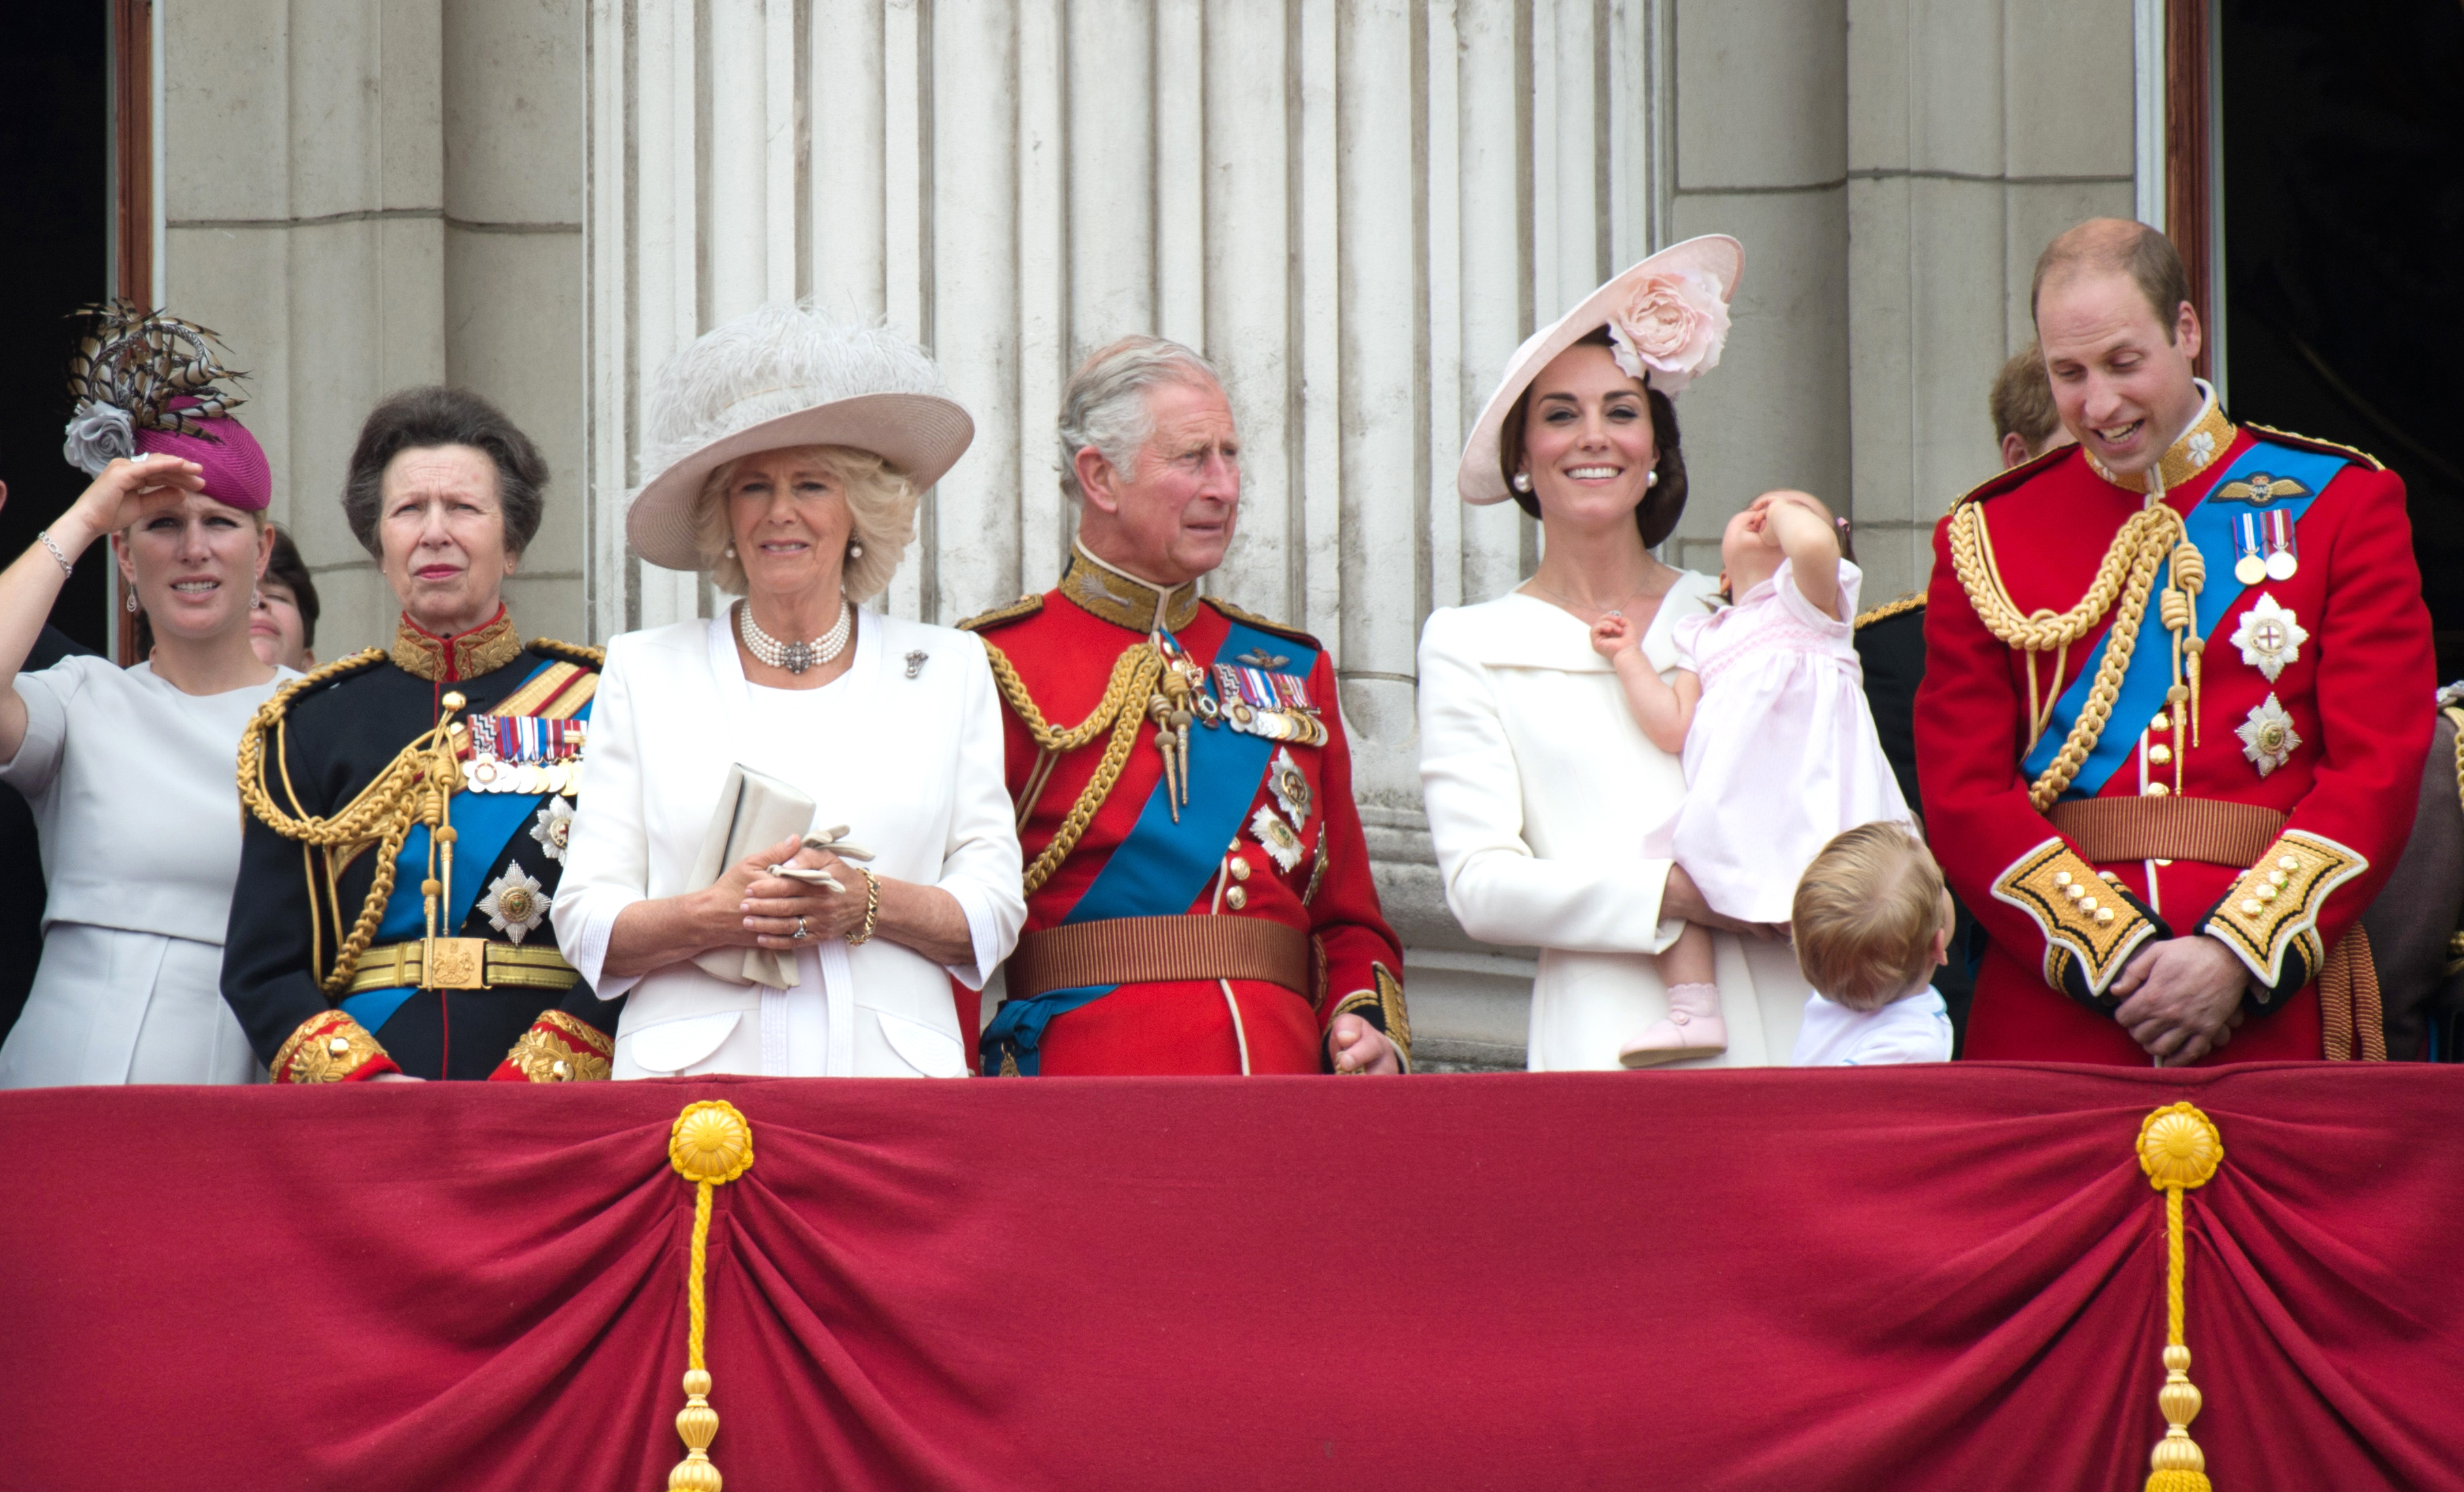 Members of the British royal family standing on the Buckingham Palace balcony